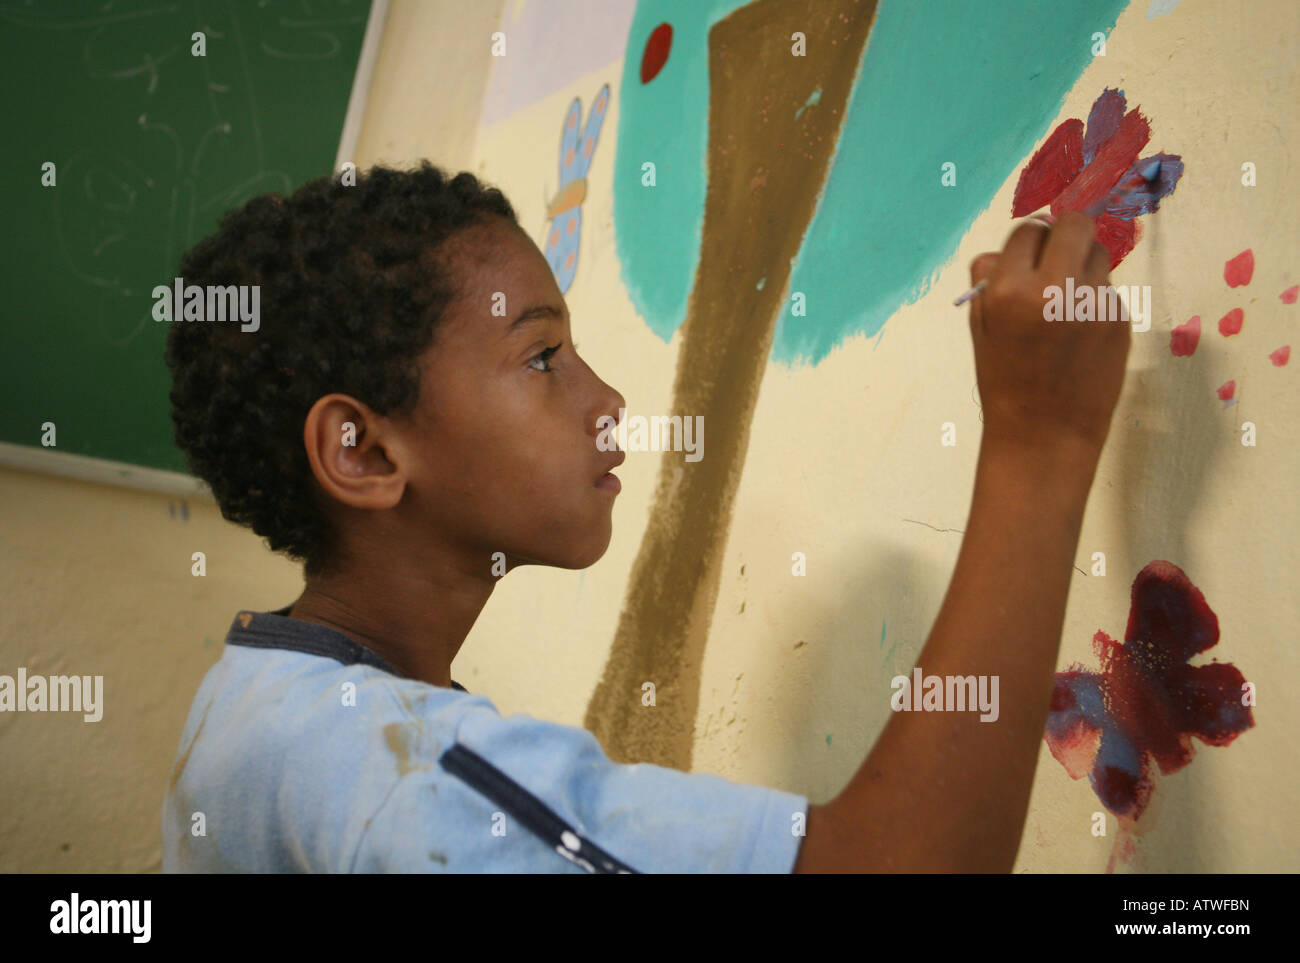 Boy child in favela community centre painting mural as pat of charity aid project, Rio de Janeiro, Brazil, South America Stock Photo